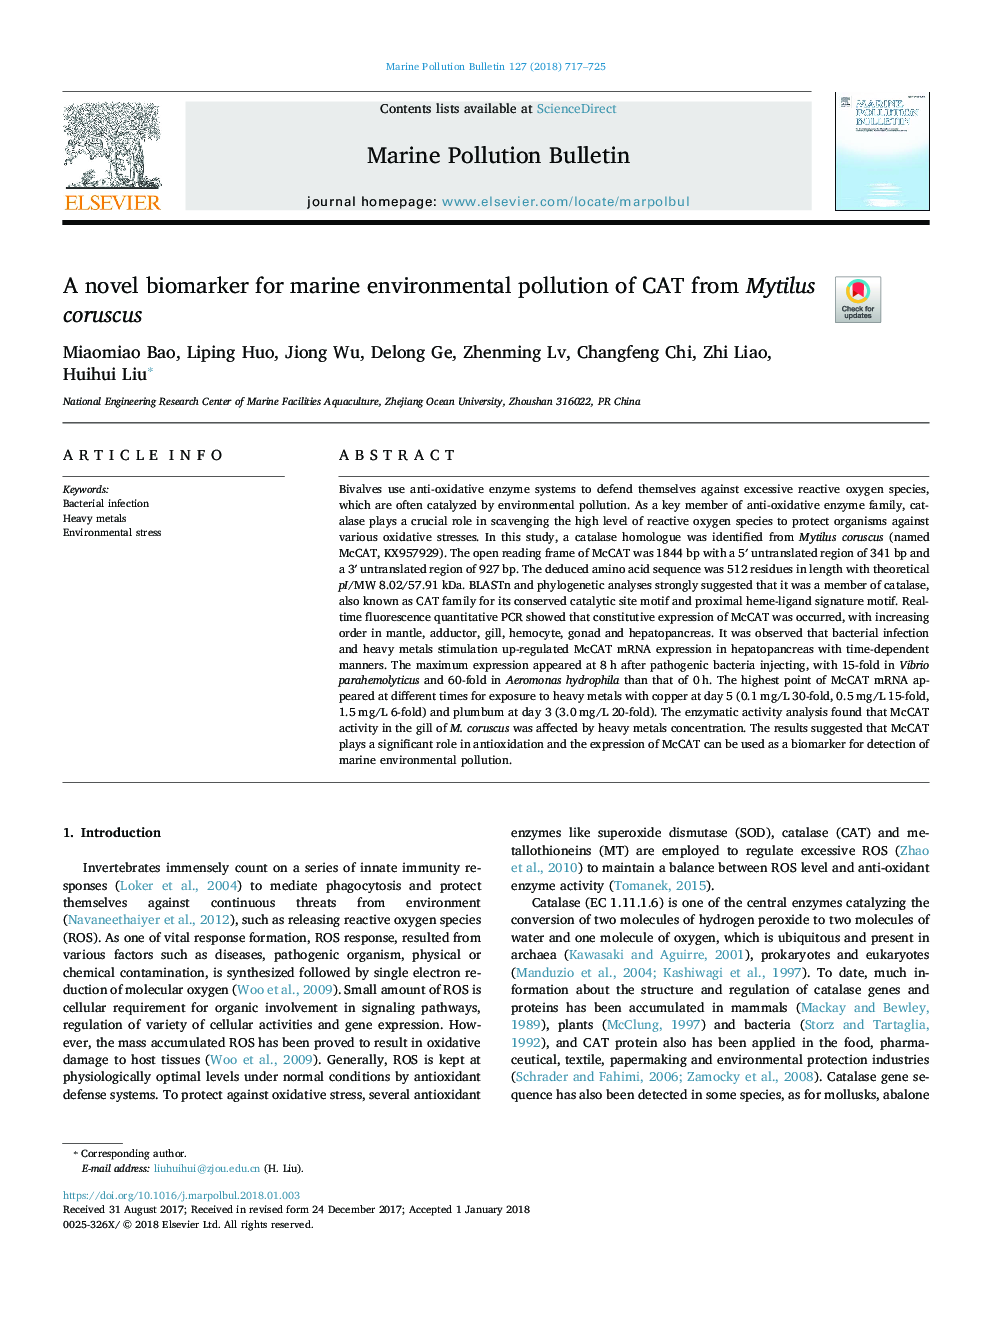 A novel biomarker for marine environmental pollution of CAT from Mytilus coruscus